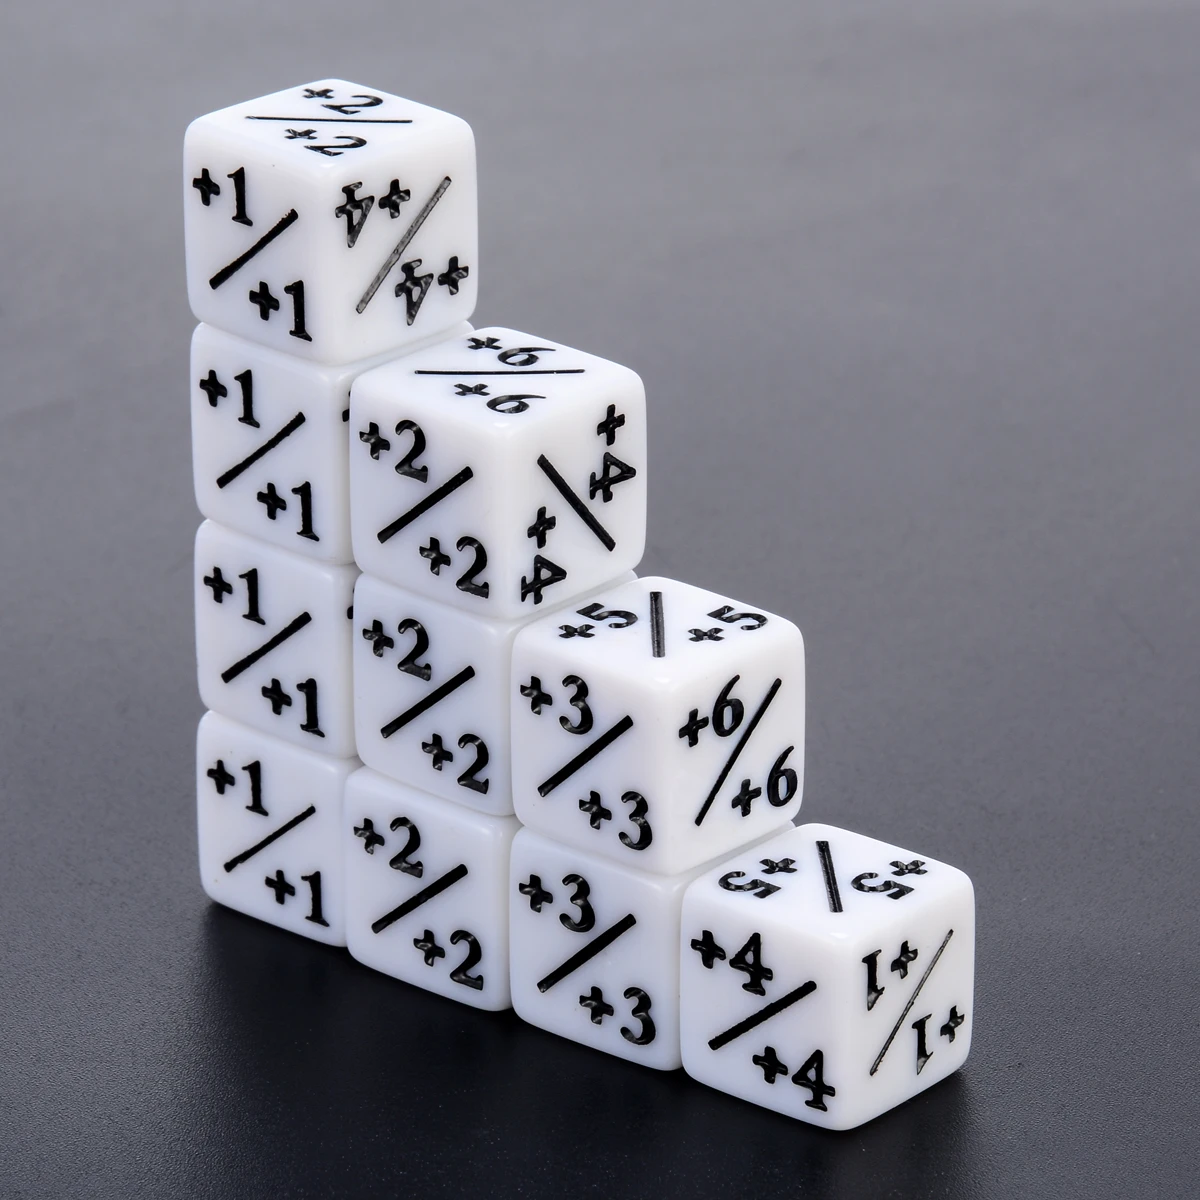 10Pcs  +1/+1 White Dice Counters For Magic The Gathering & RPG MTG Table Party Bar Outdoor Interesting Games Portable Dices